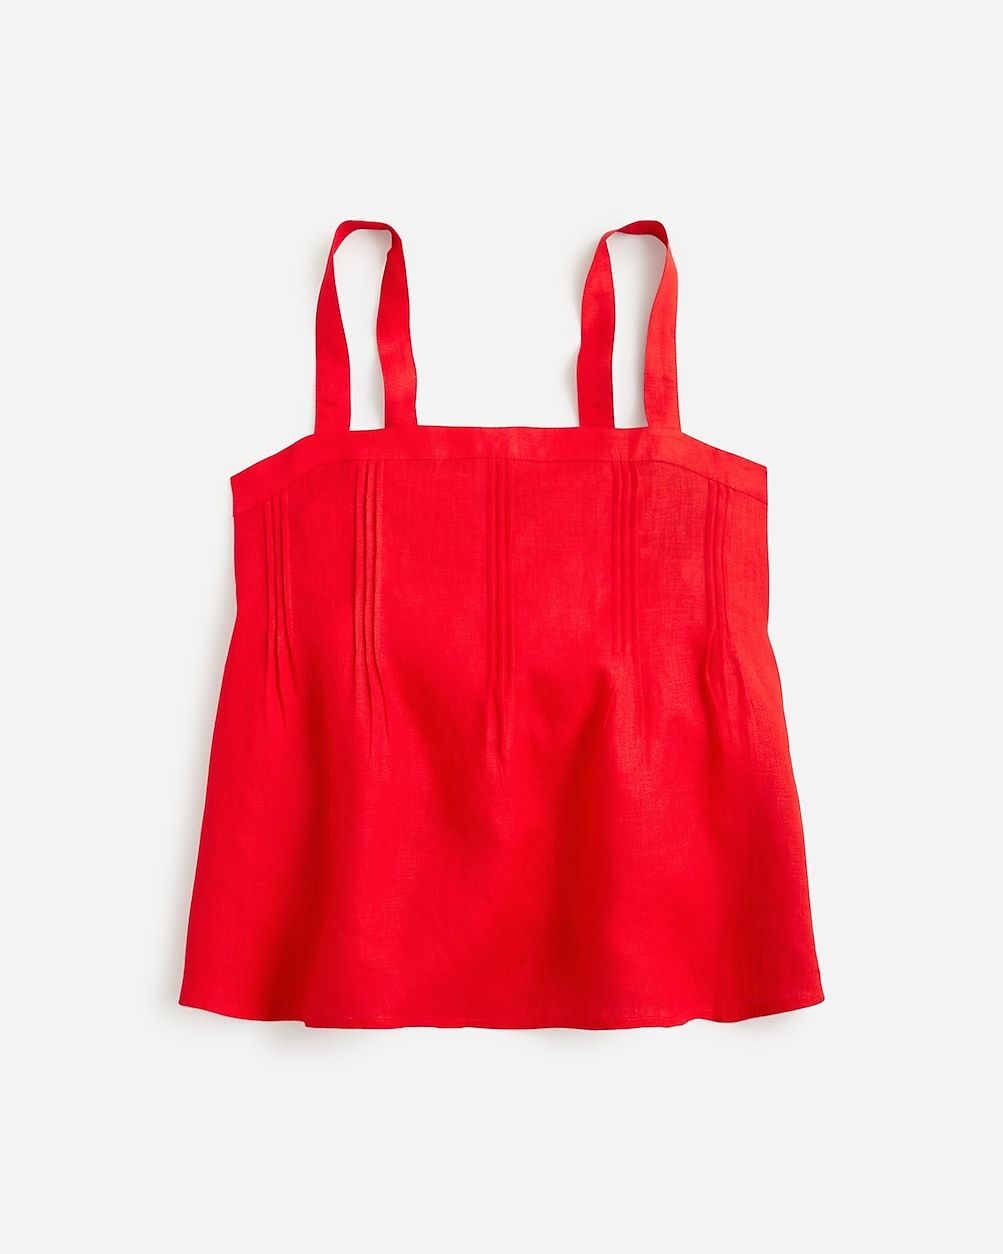 new4.0(1 REVIEWS)Bow-back linen top$79.5030% off full price with code SHOP30Vintage RedSelect a s... | J.Crew US